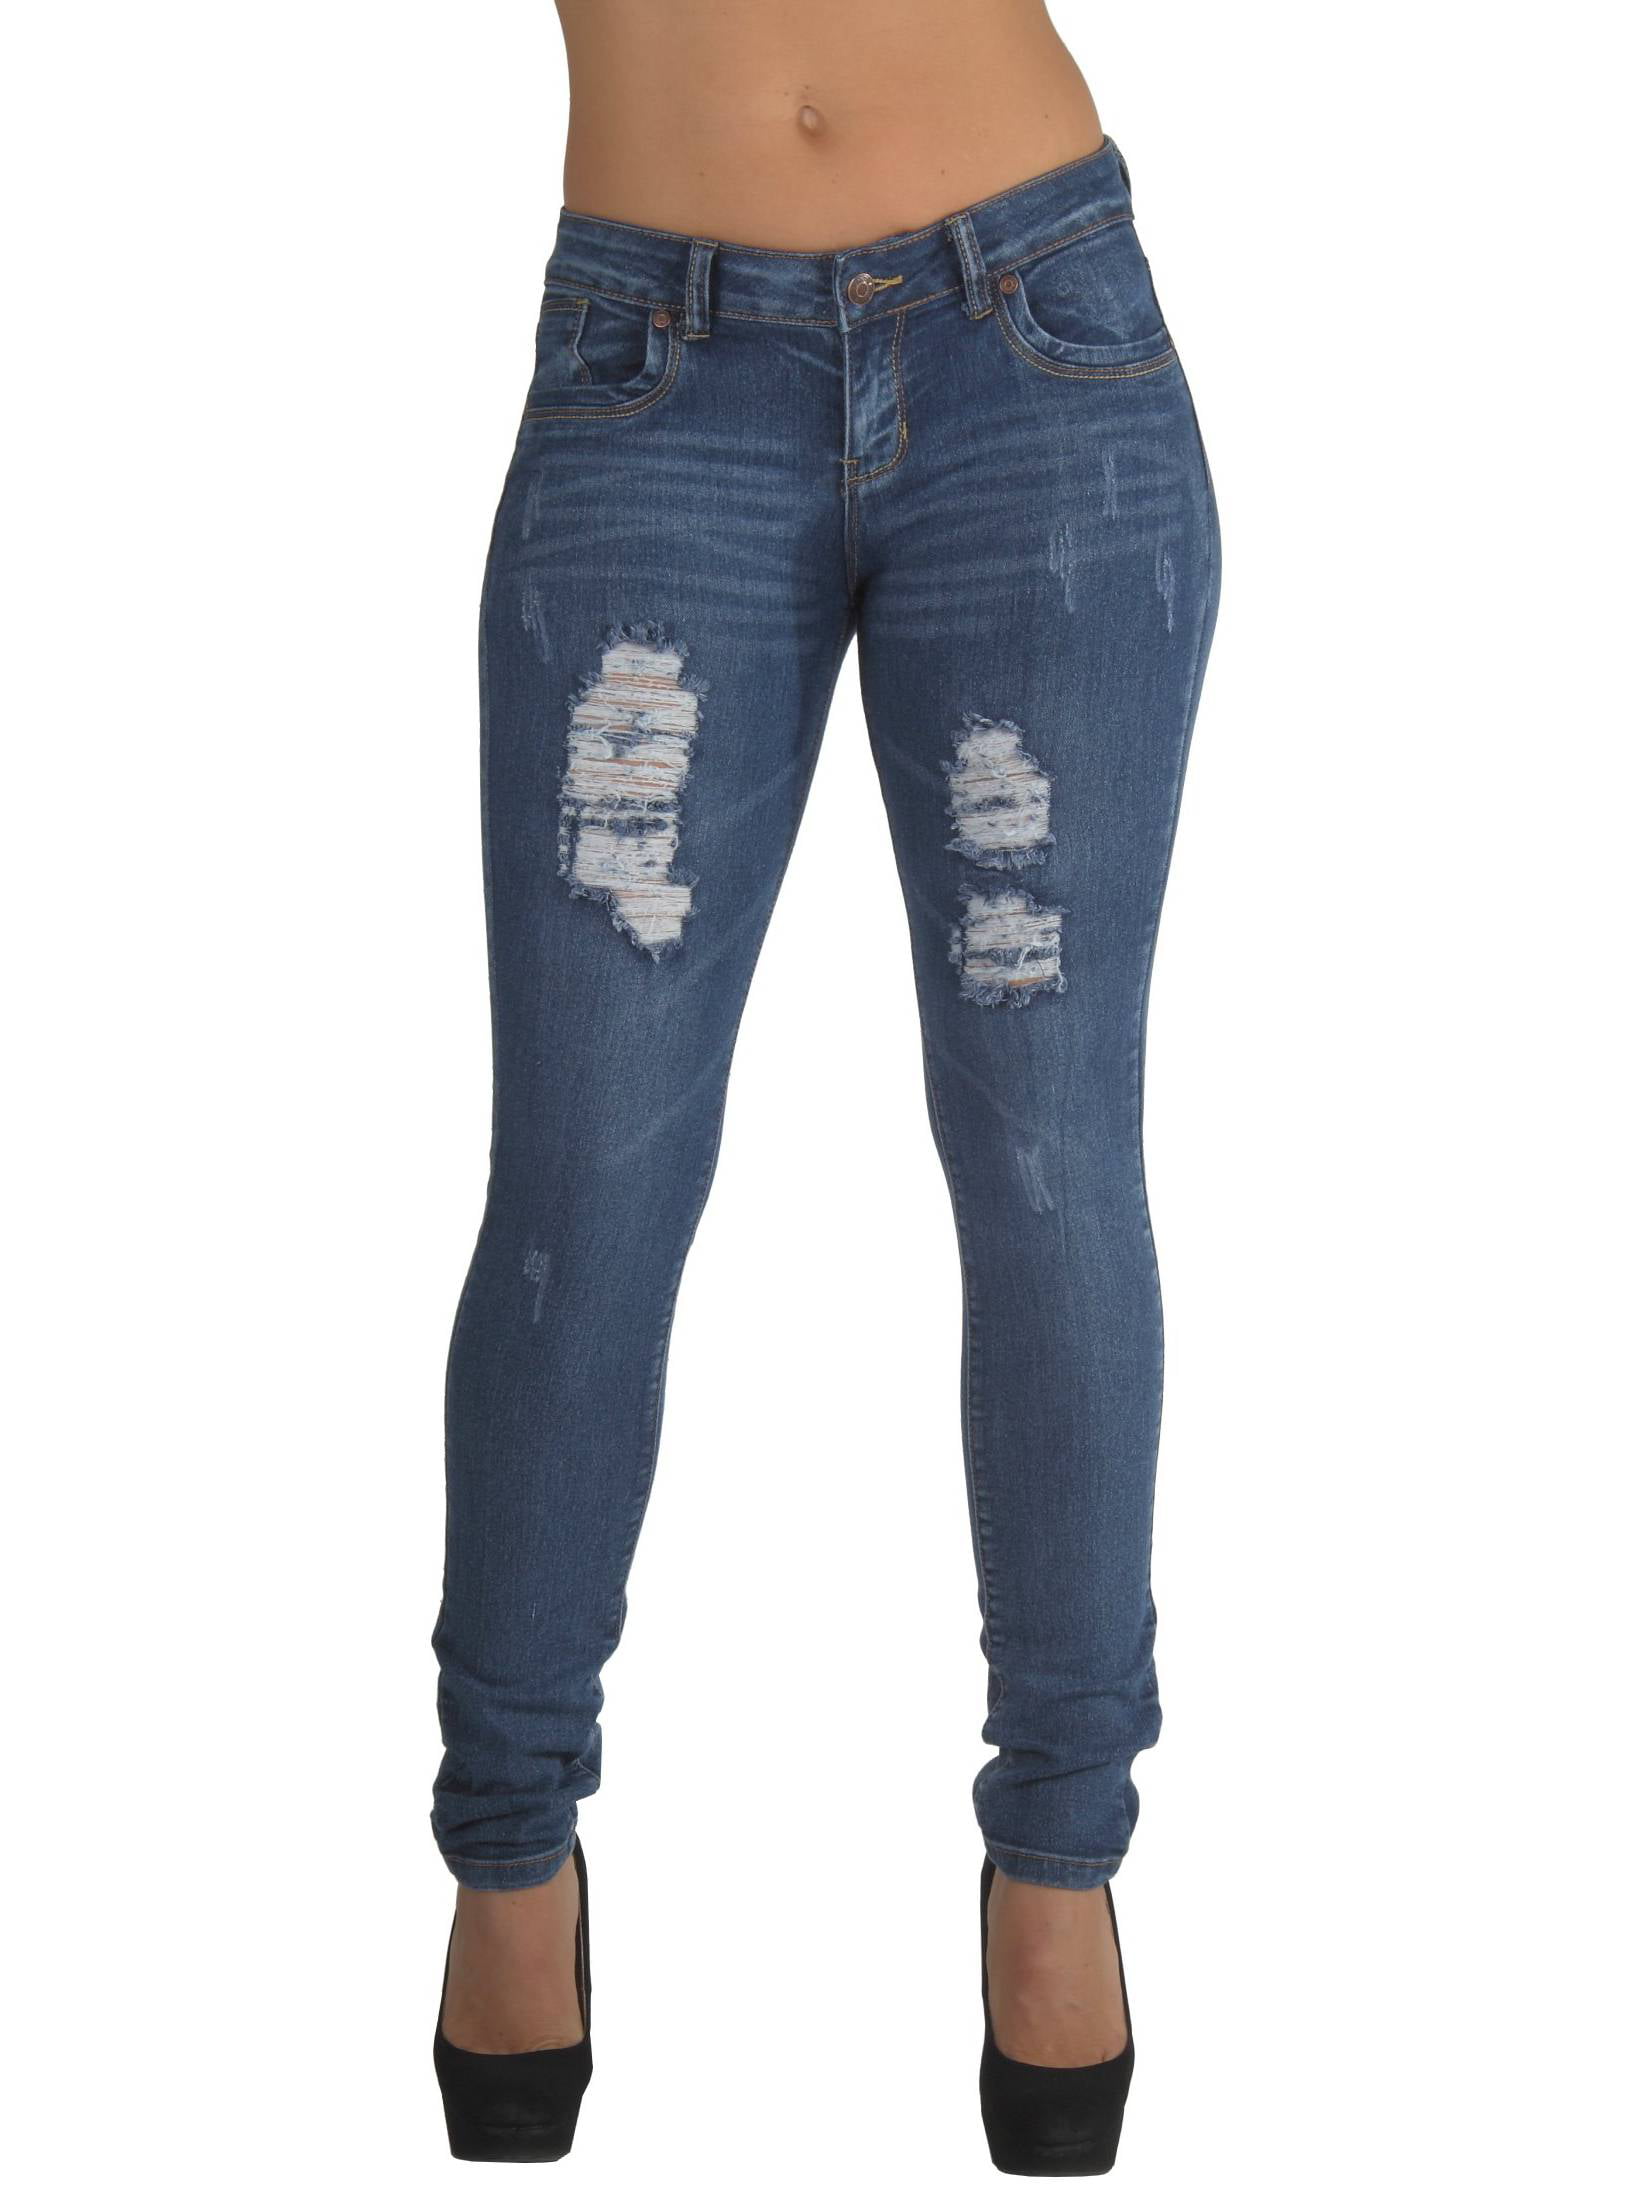 fashion2love-plus-size-classic-ripped-distressed-destroyed-skinny